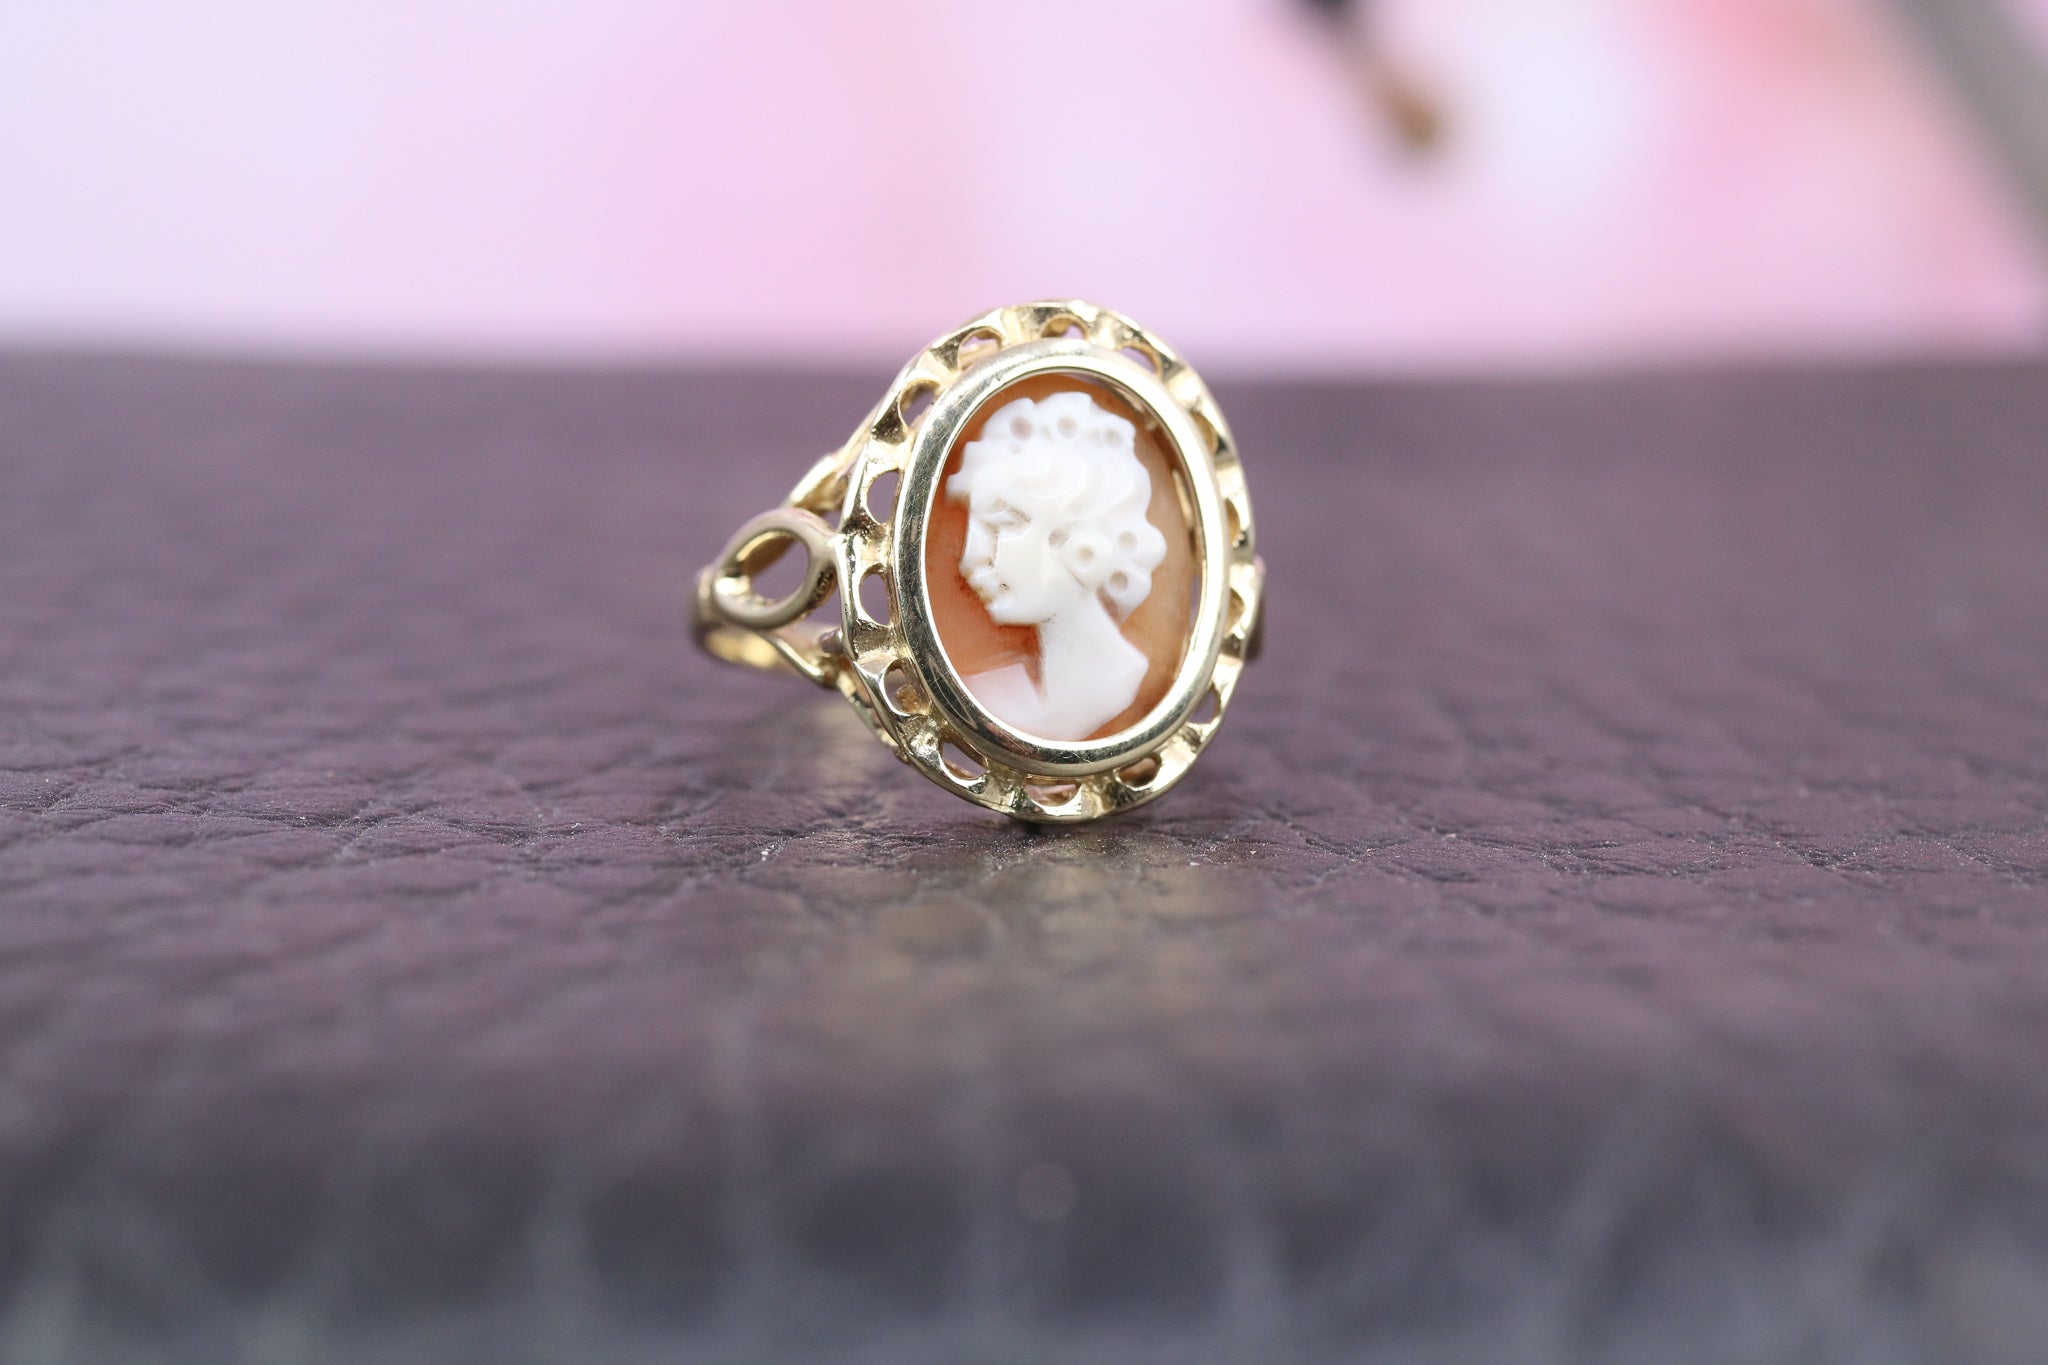 9ct Yellow Gold Cameo Ring - HJ2587 - Hallmark Jewellers Formby & The Jewellers Bench Widnes